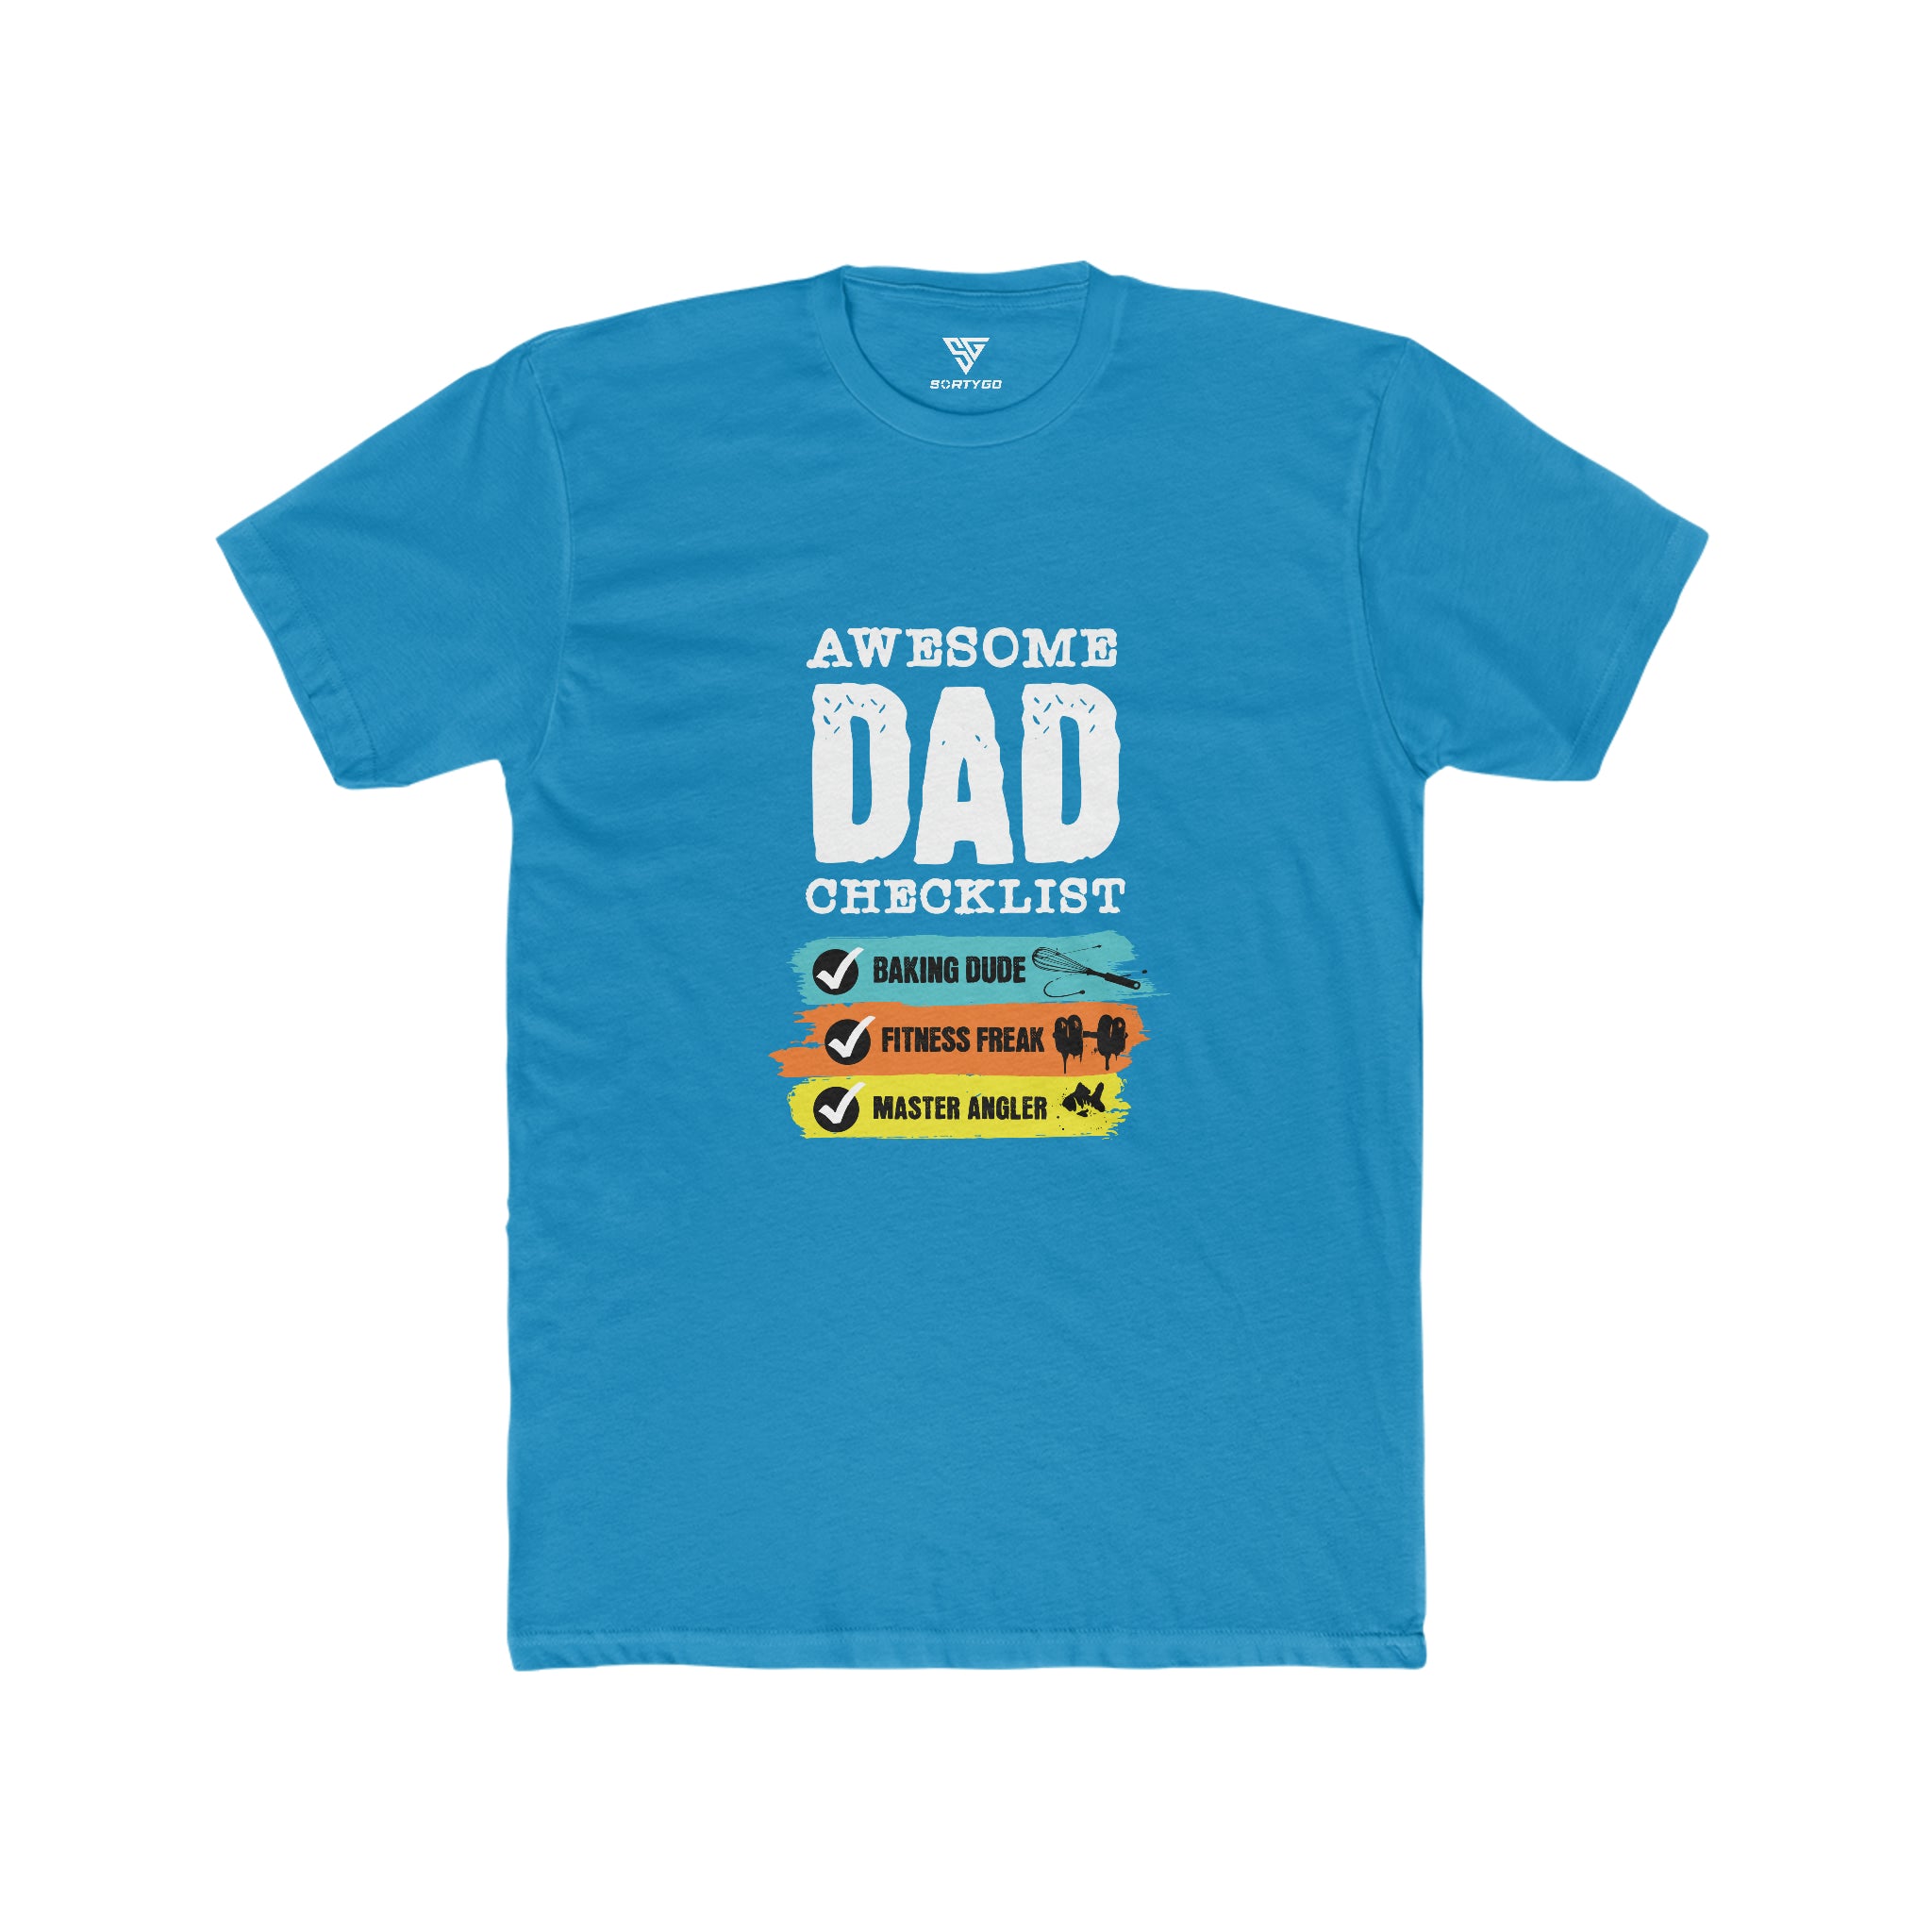 SORTYGO - Awesome Dad Men Fitted T-Shirt in Solid Turquoise